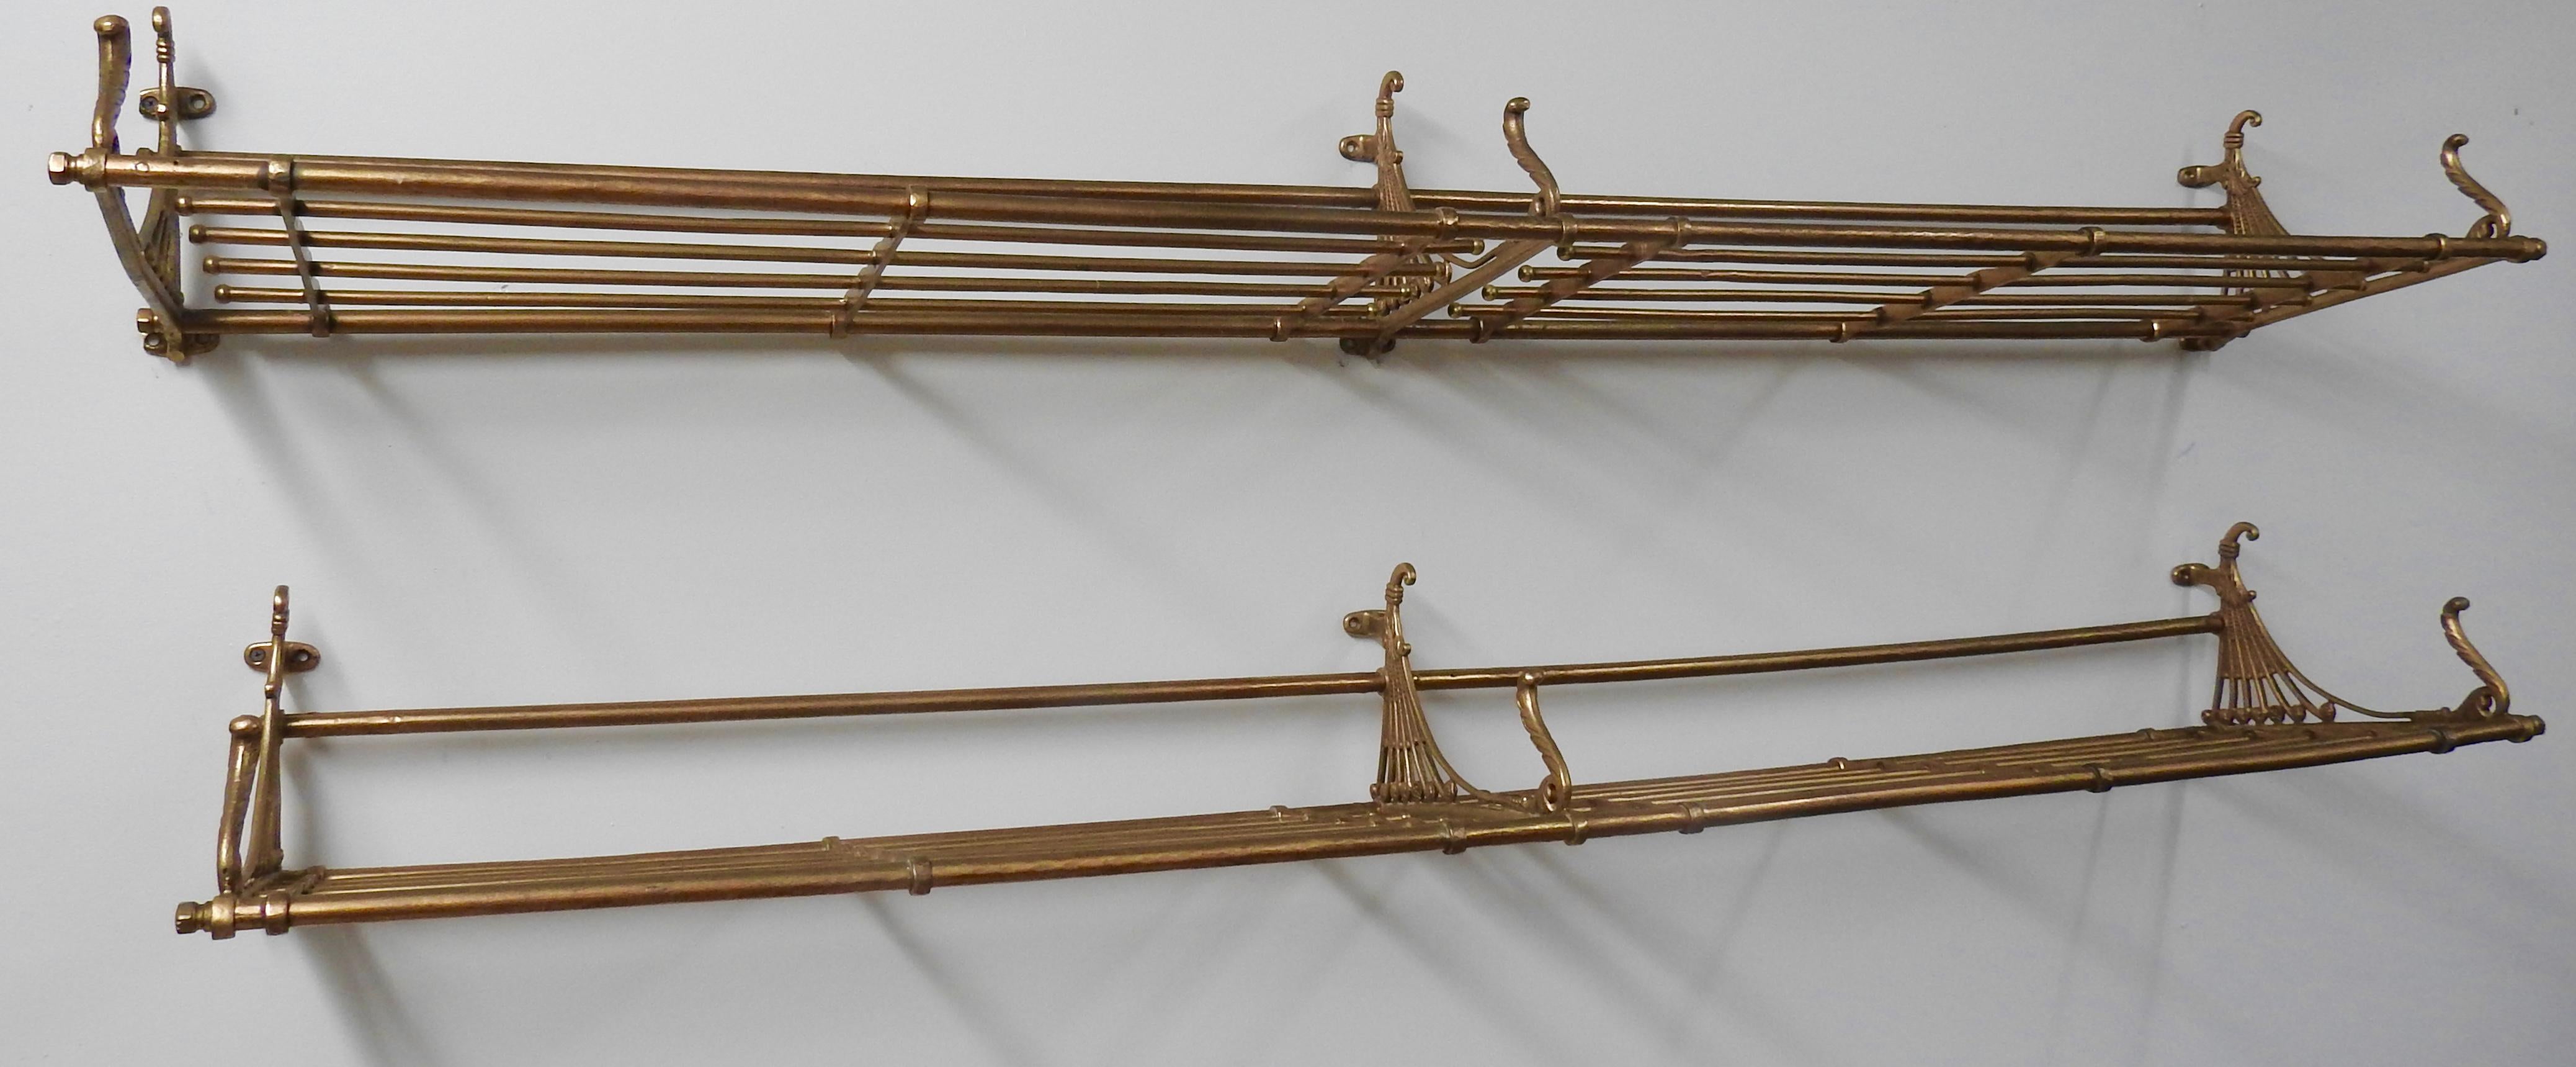 We are featuring a beautiful pair of antique brass train car luggage racks from the late 19th century. The patinated brass is consistent with age and use of the luggage racks. The rack features an open, tubular shelf supported by three wall-mounted